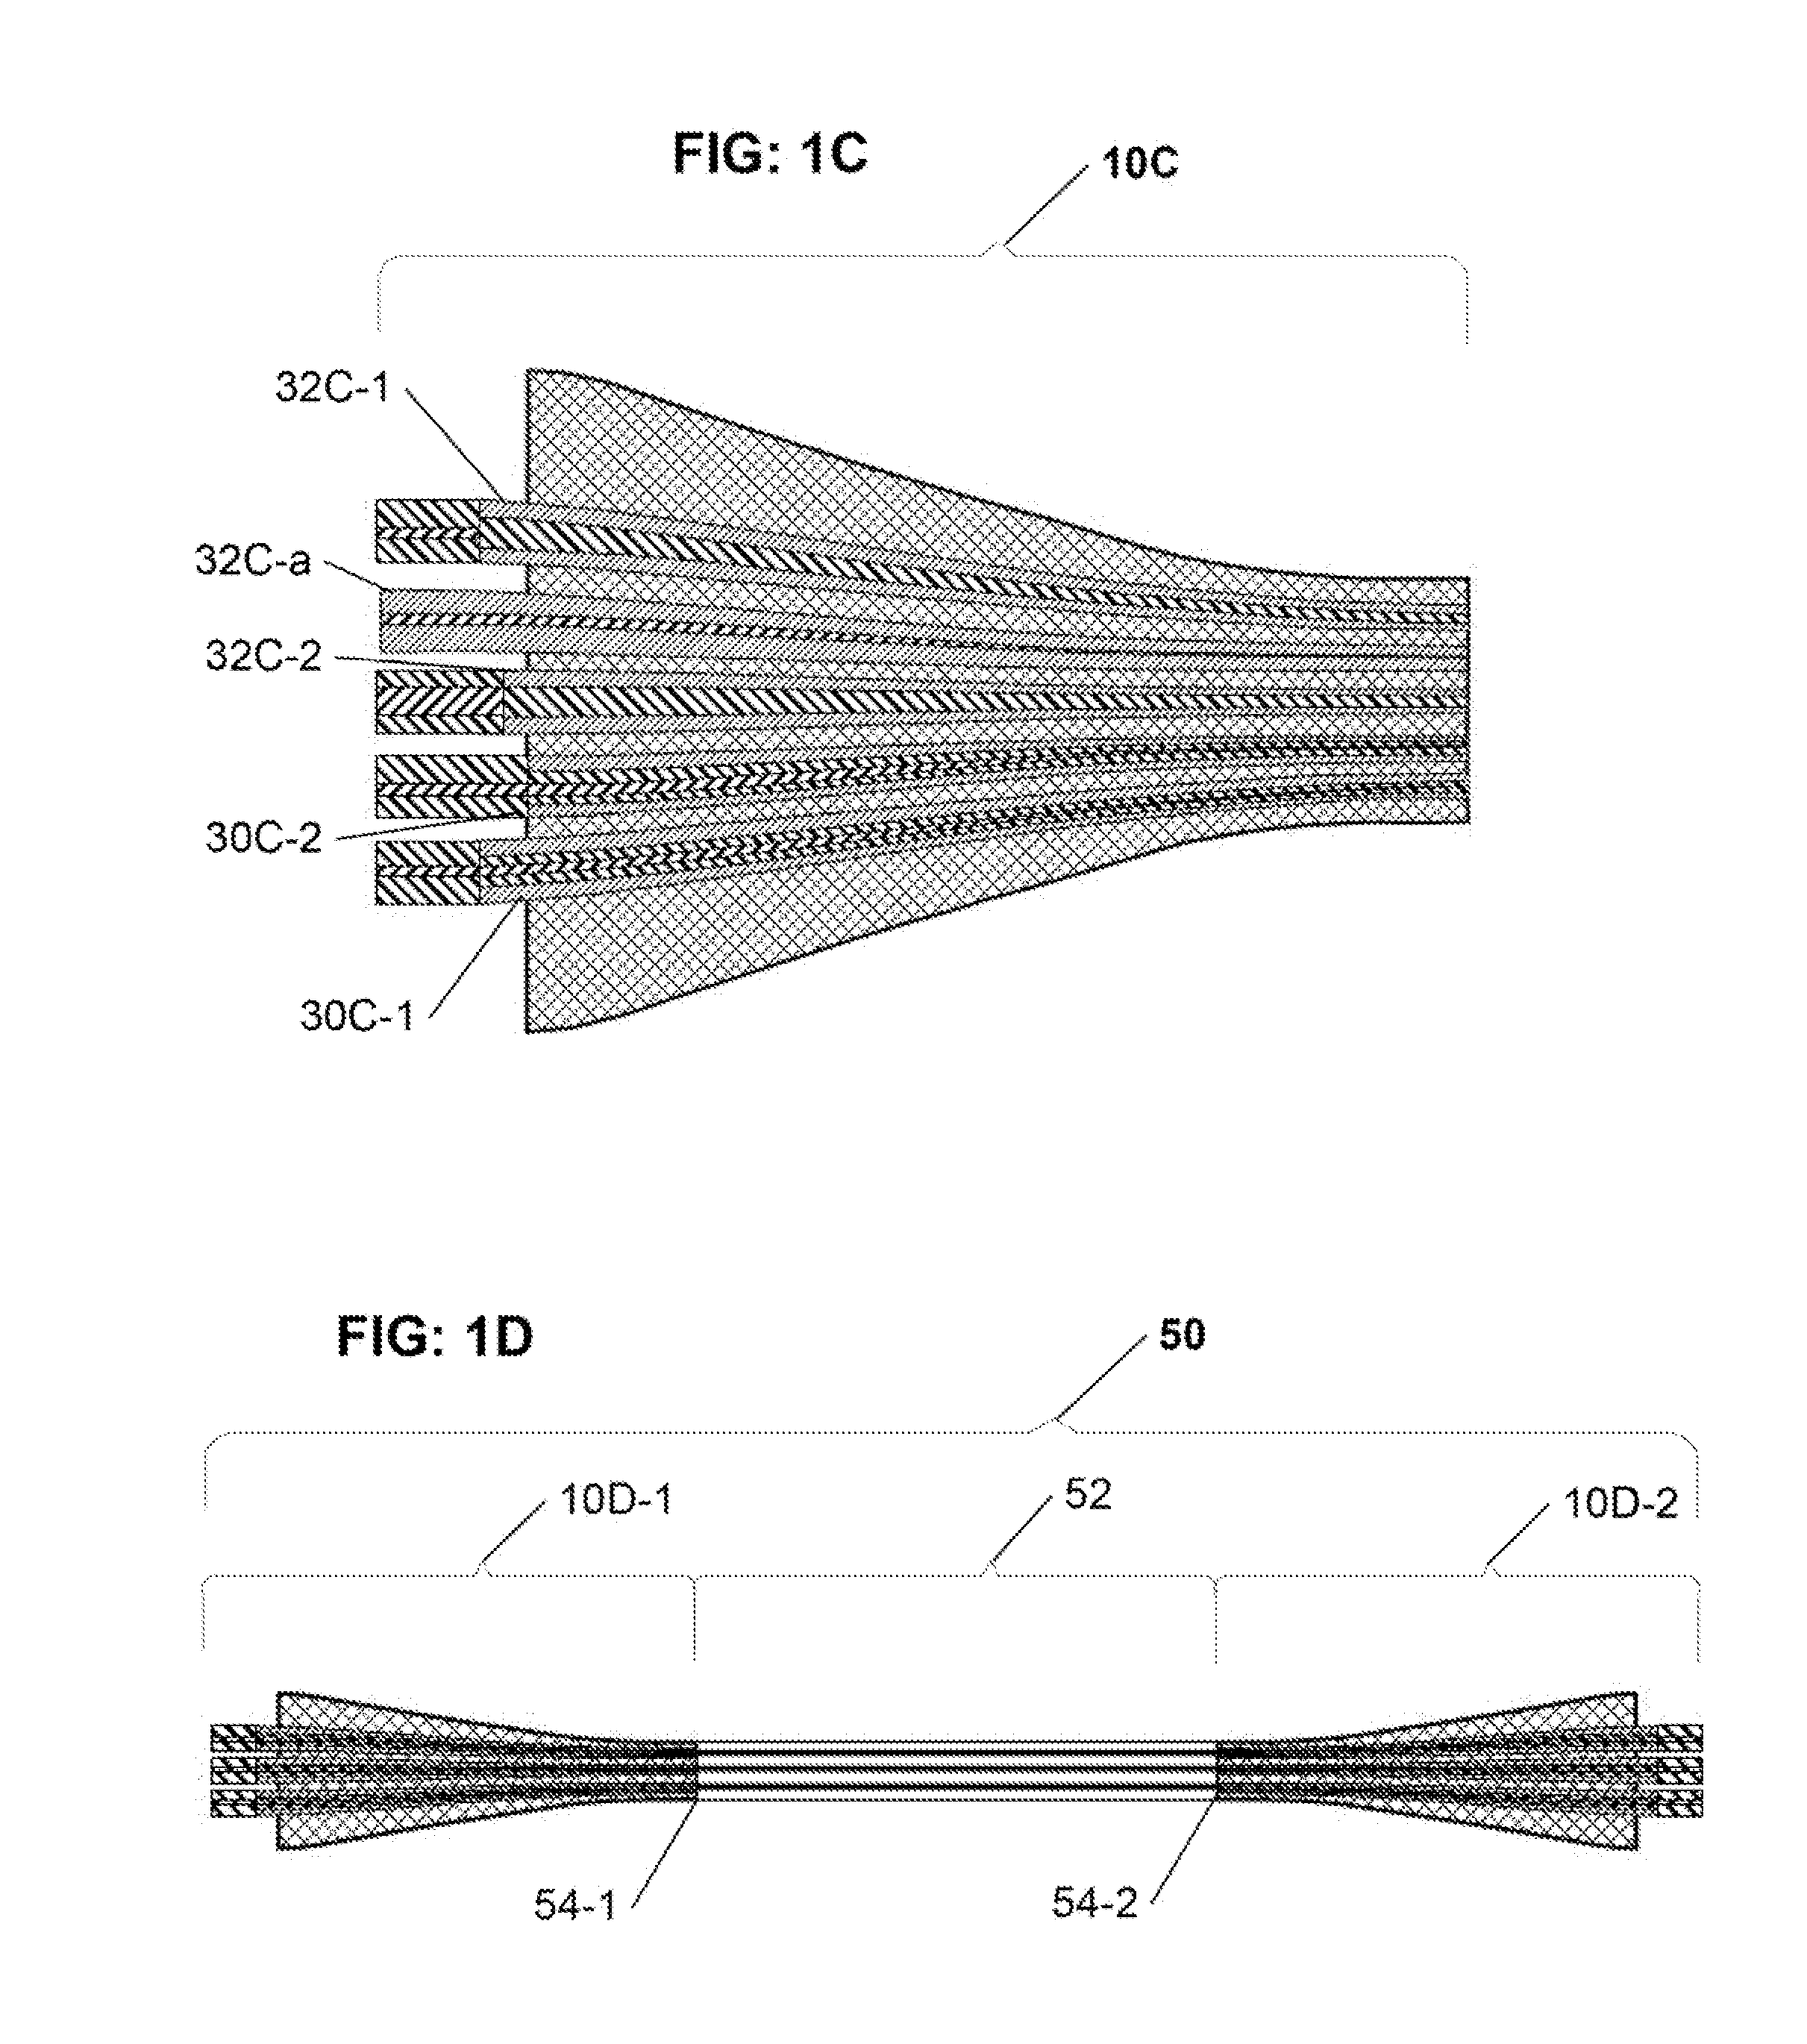 Optical component assembly for use with an optical device